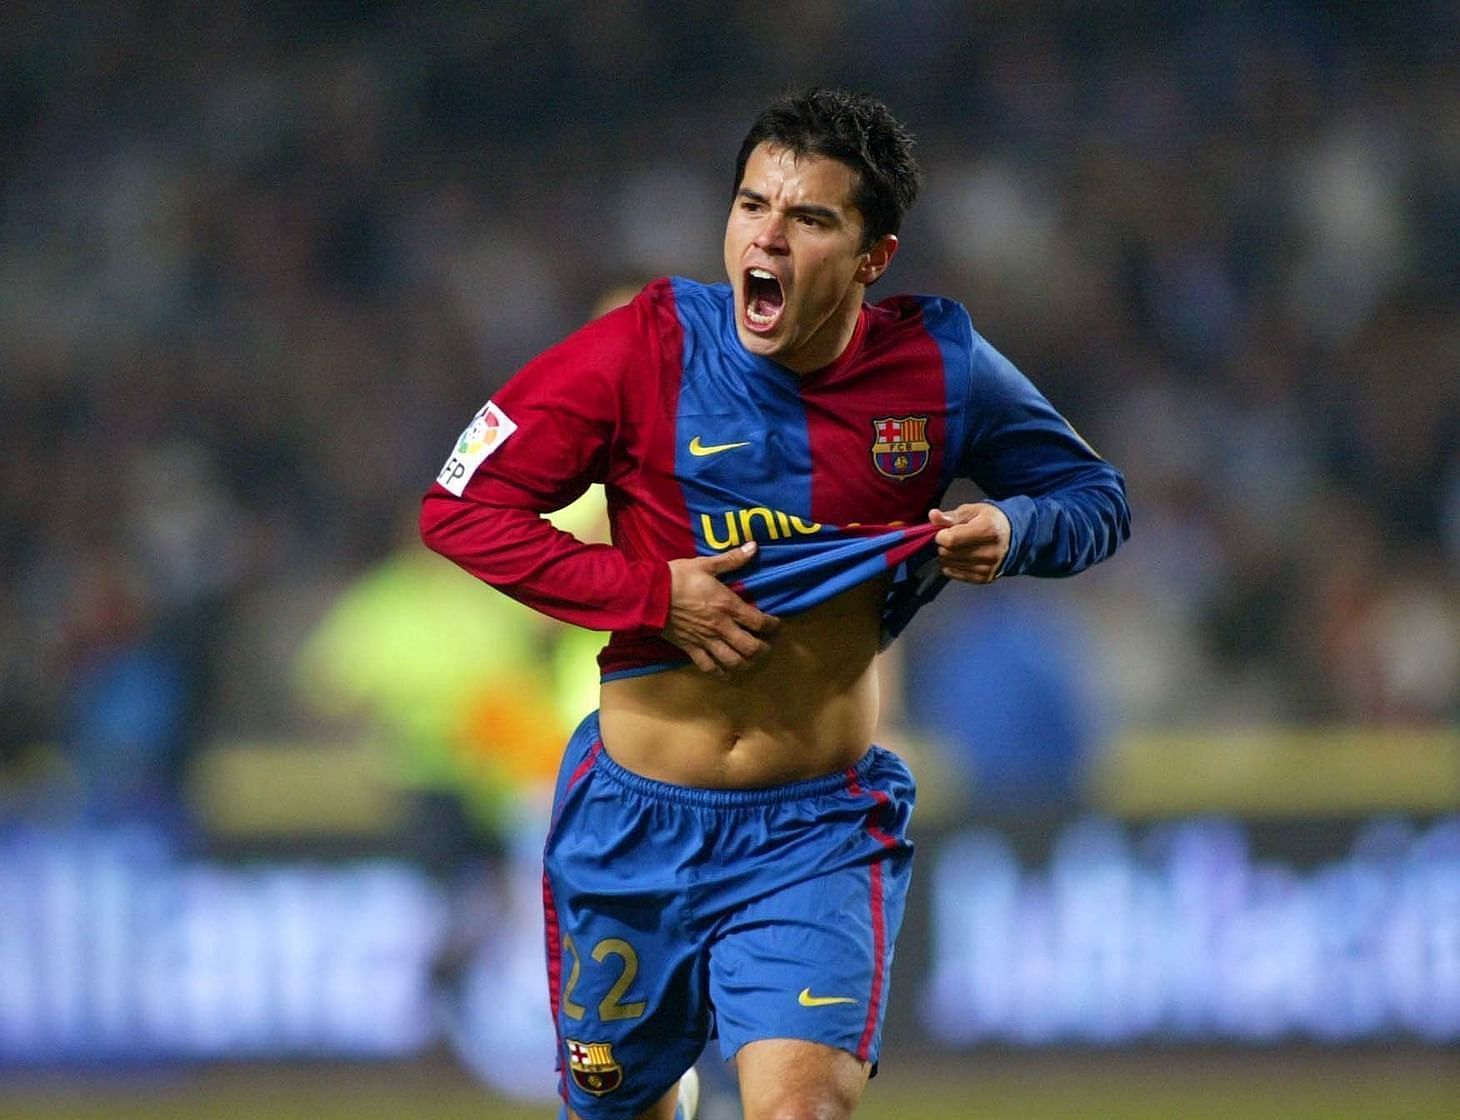 Iconic player who transferred directly between Barcelona and Real Madrid